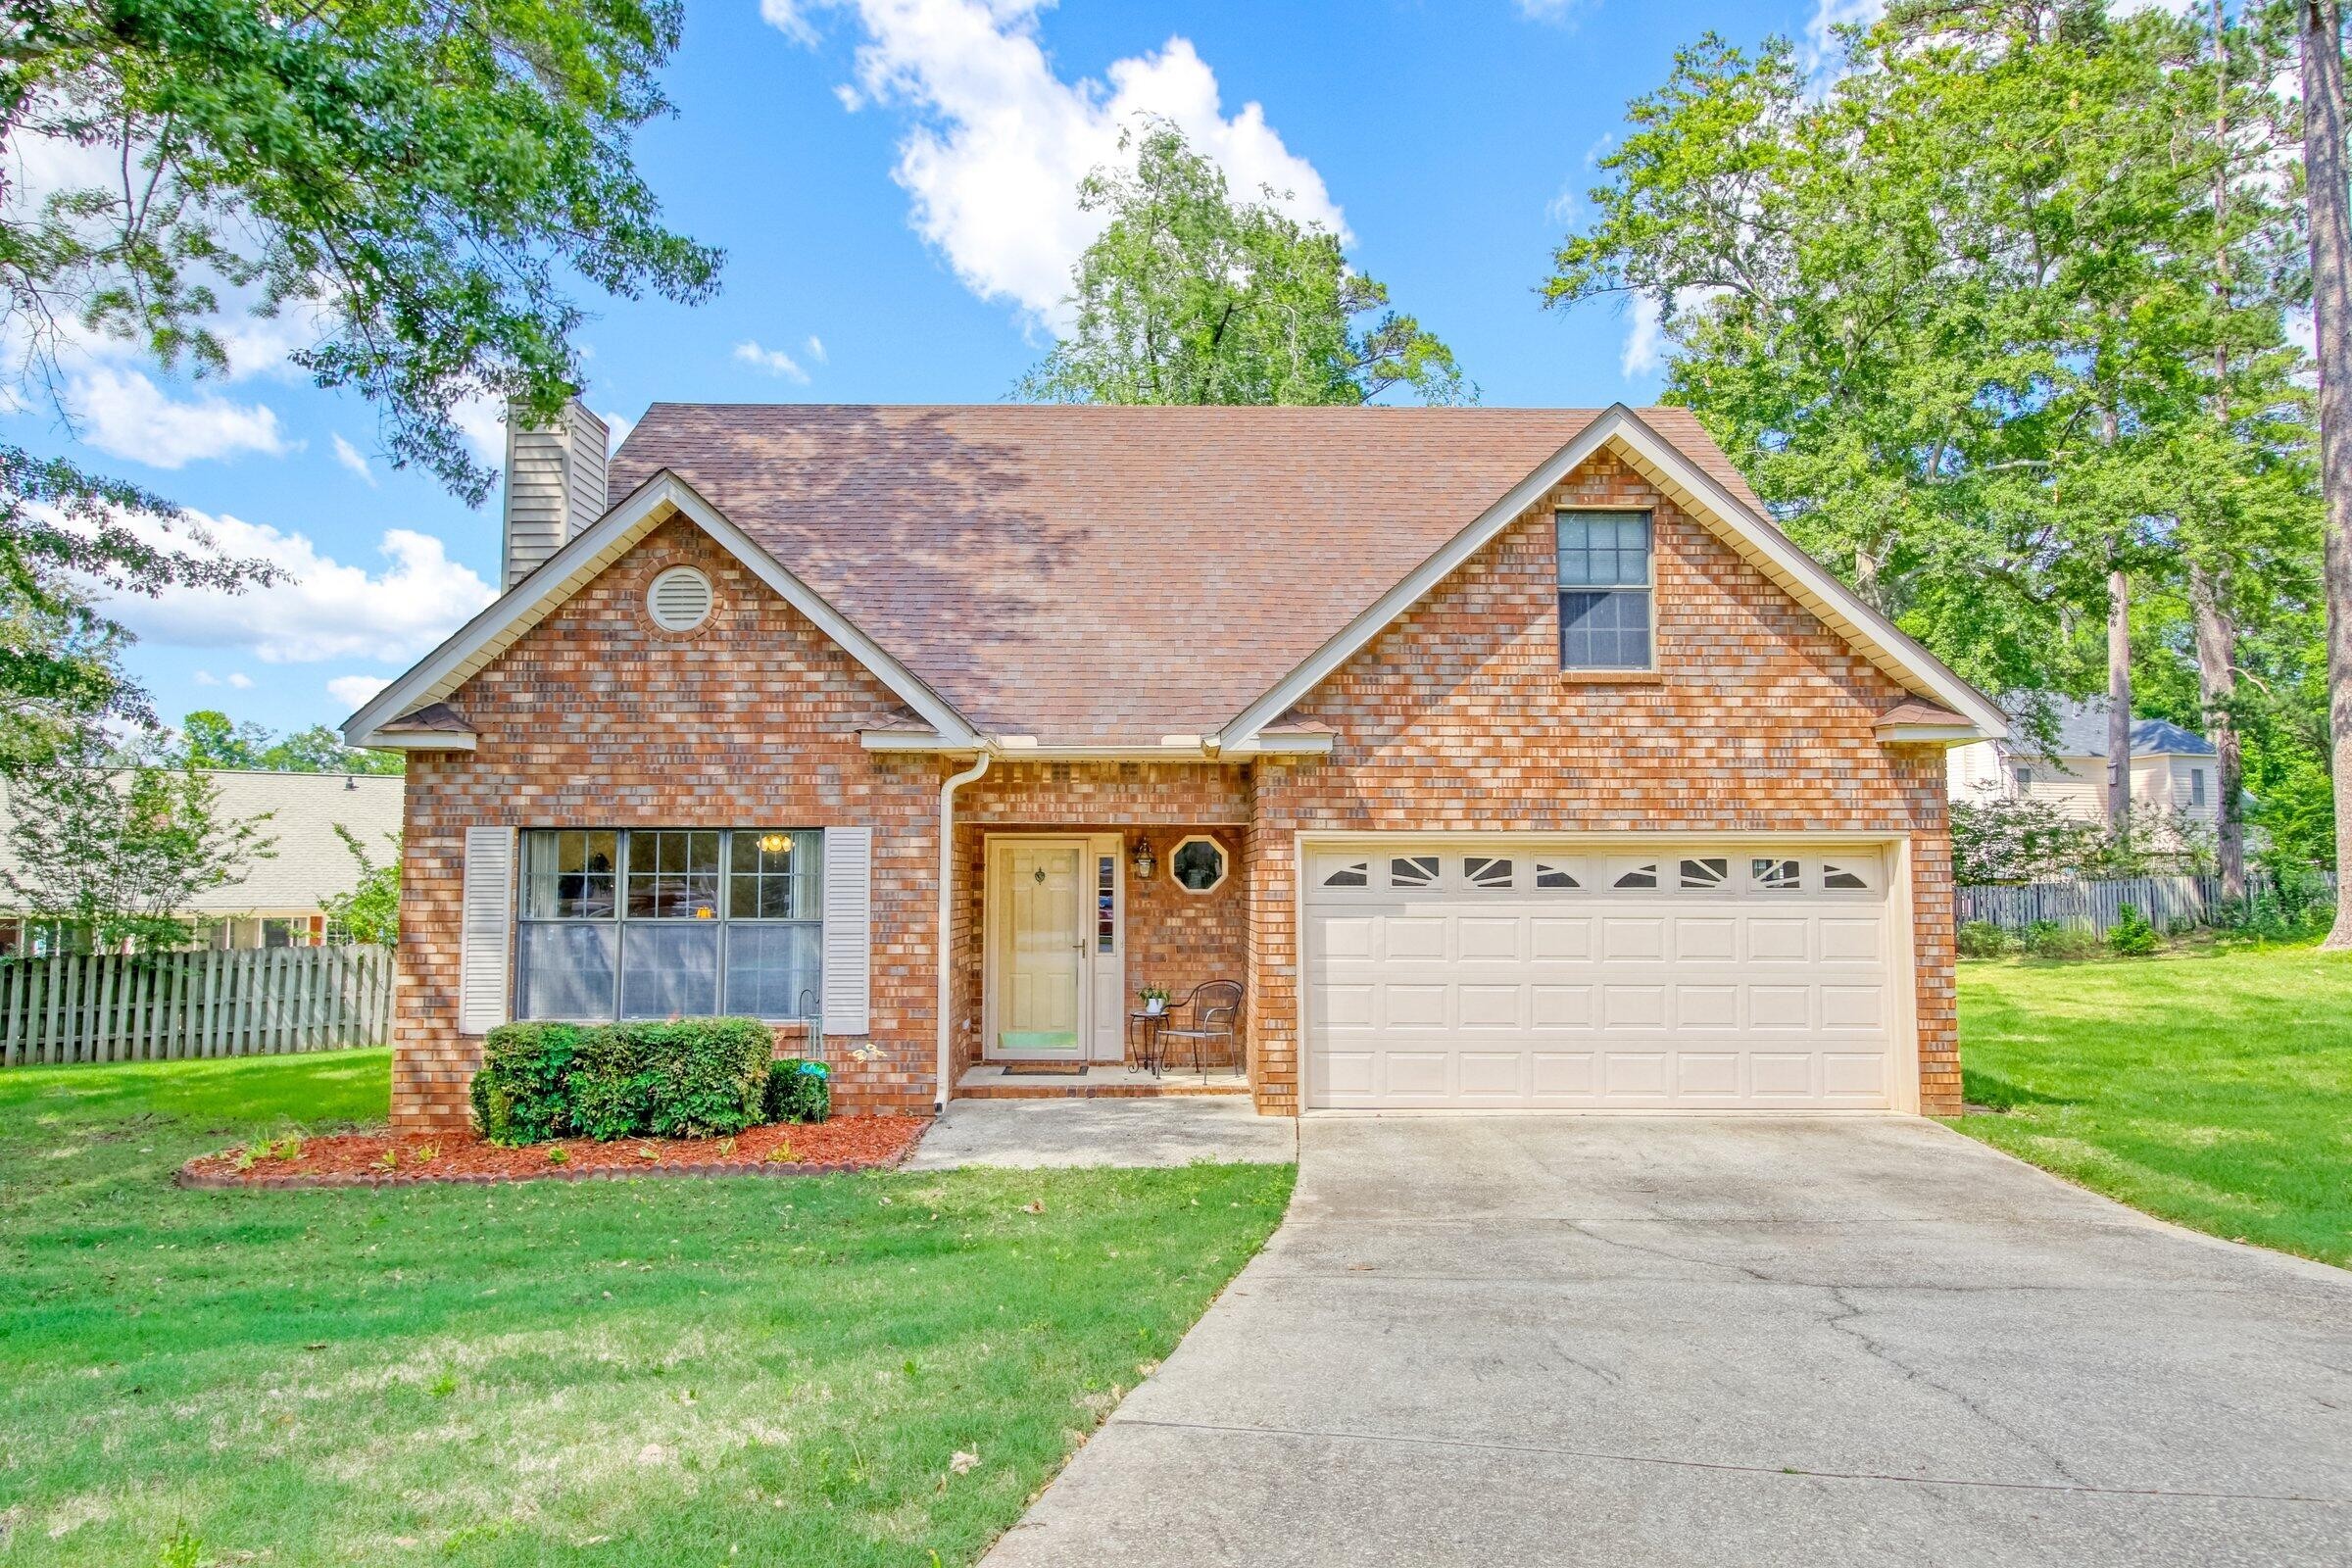 1. 4618 Country Meadows Court